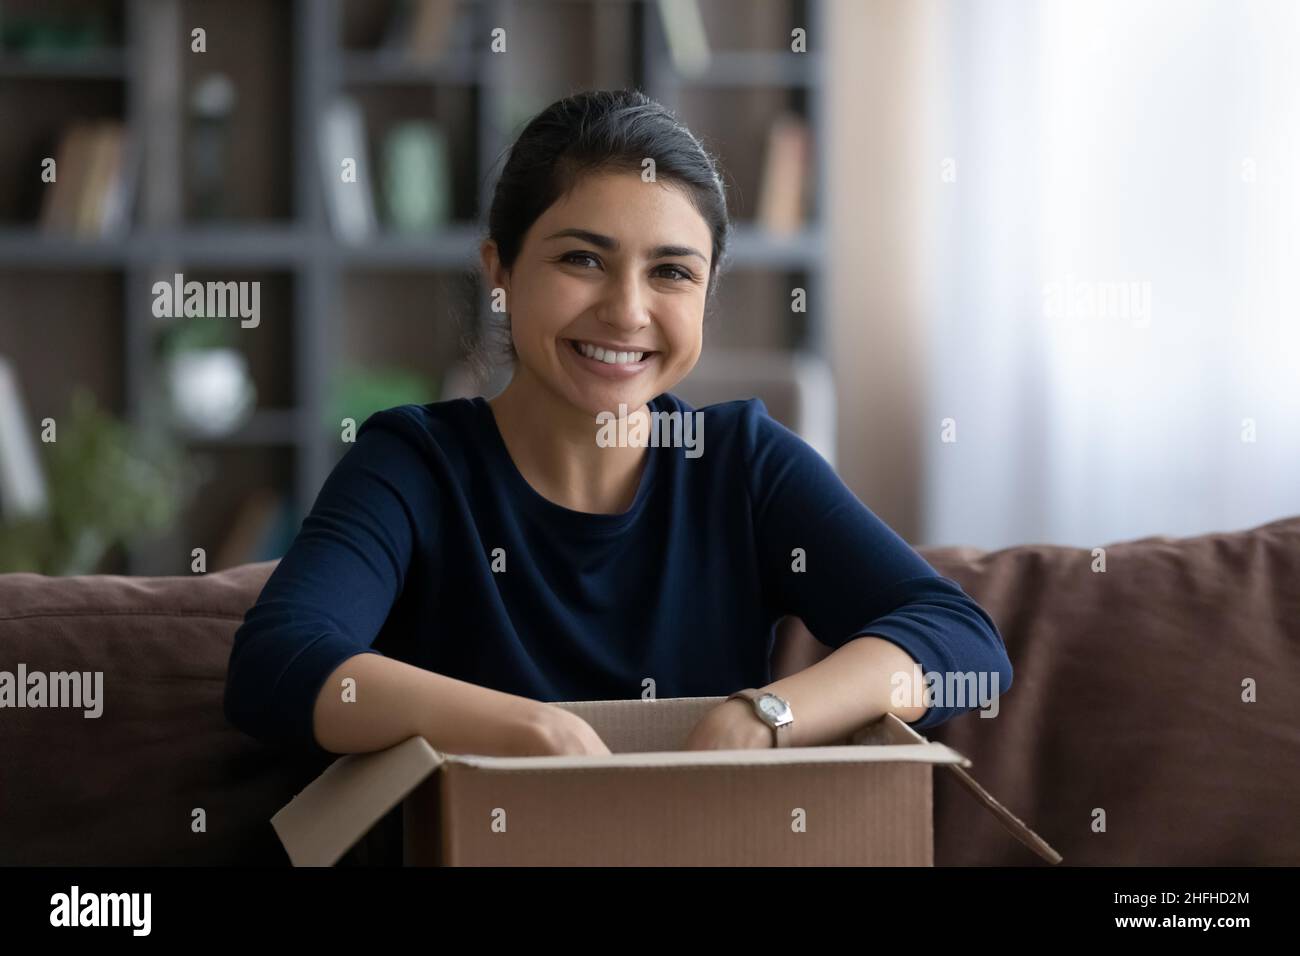 Portrait of happy young Indian woman unpacking carton box. Stock Photo